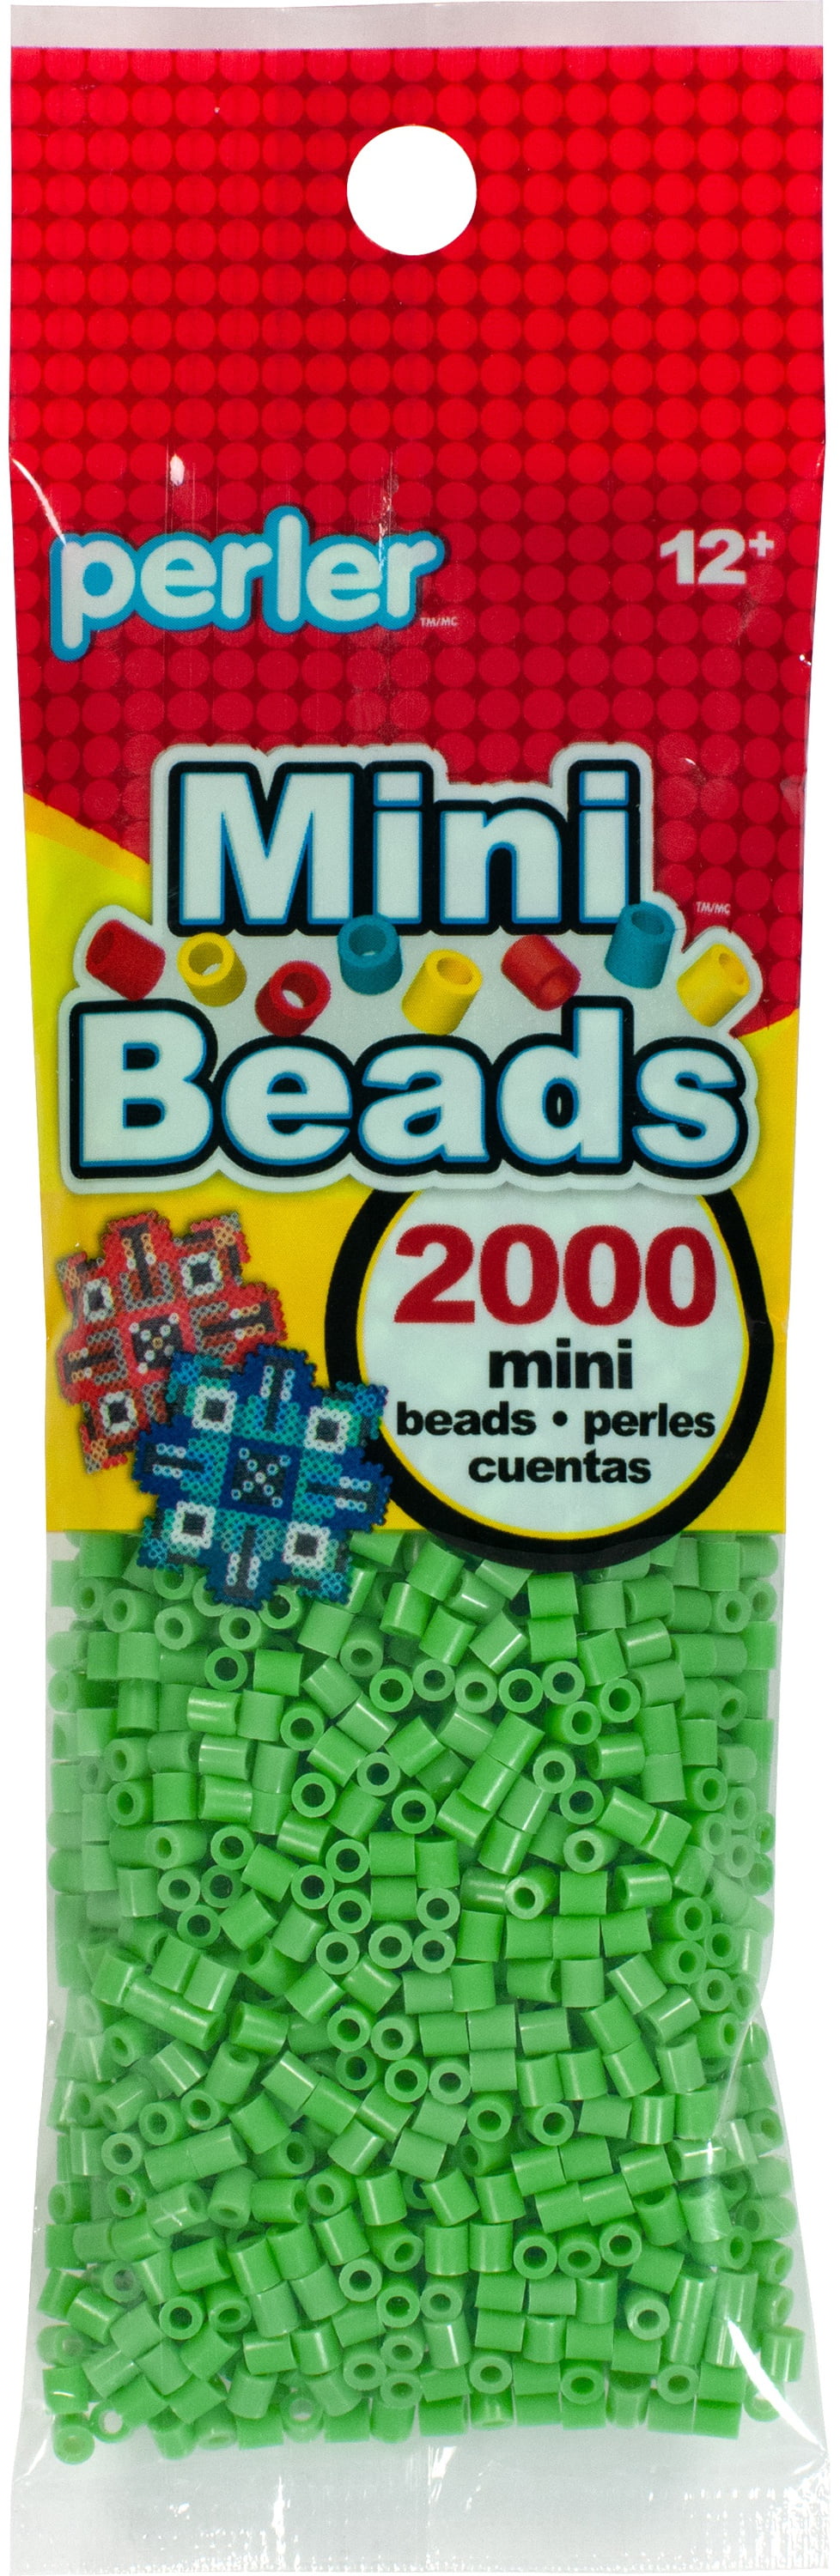 Unobite 200 Piece Plastic Number Beads with Colorful Numbers 123